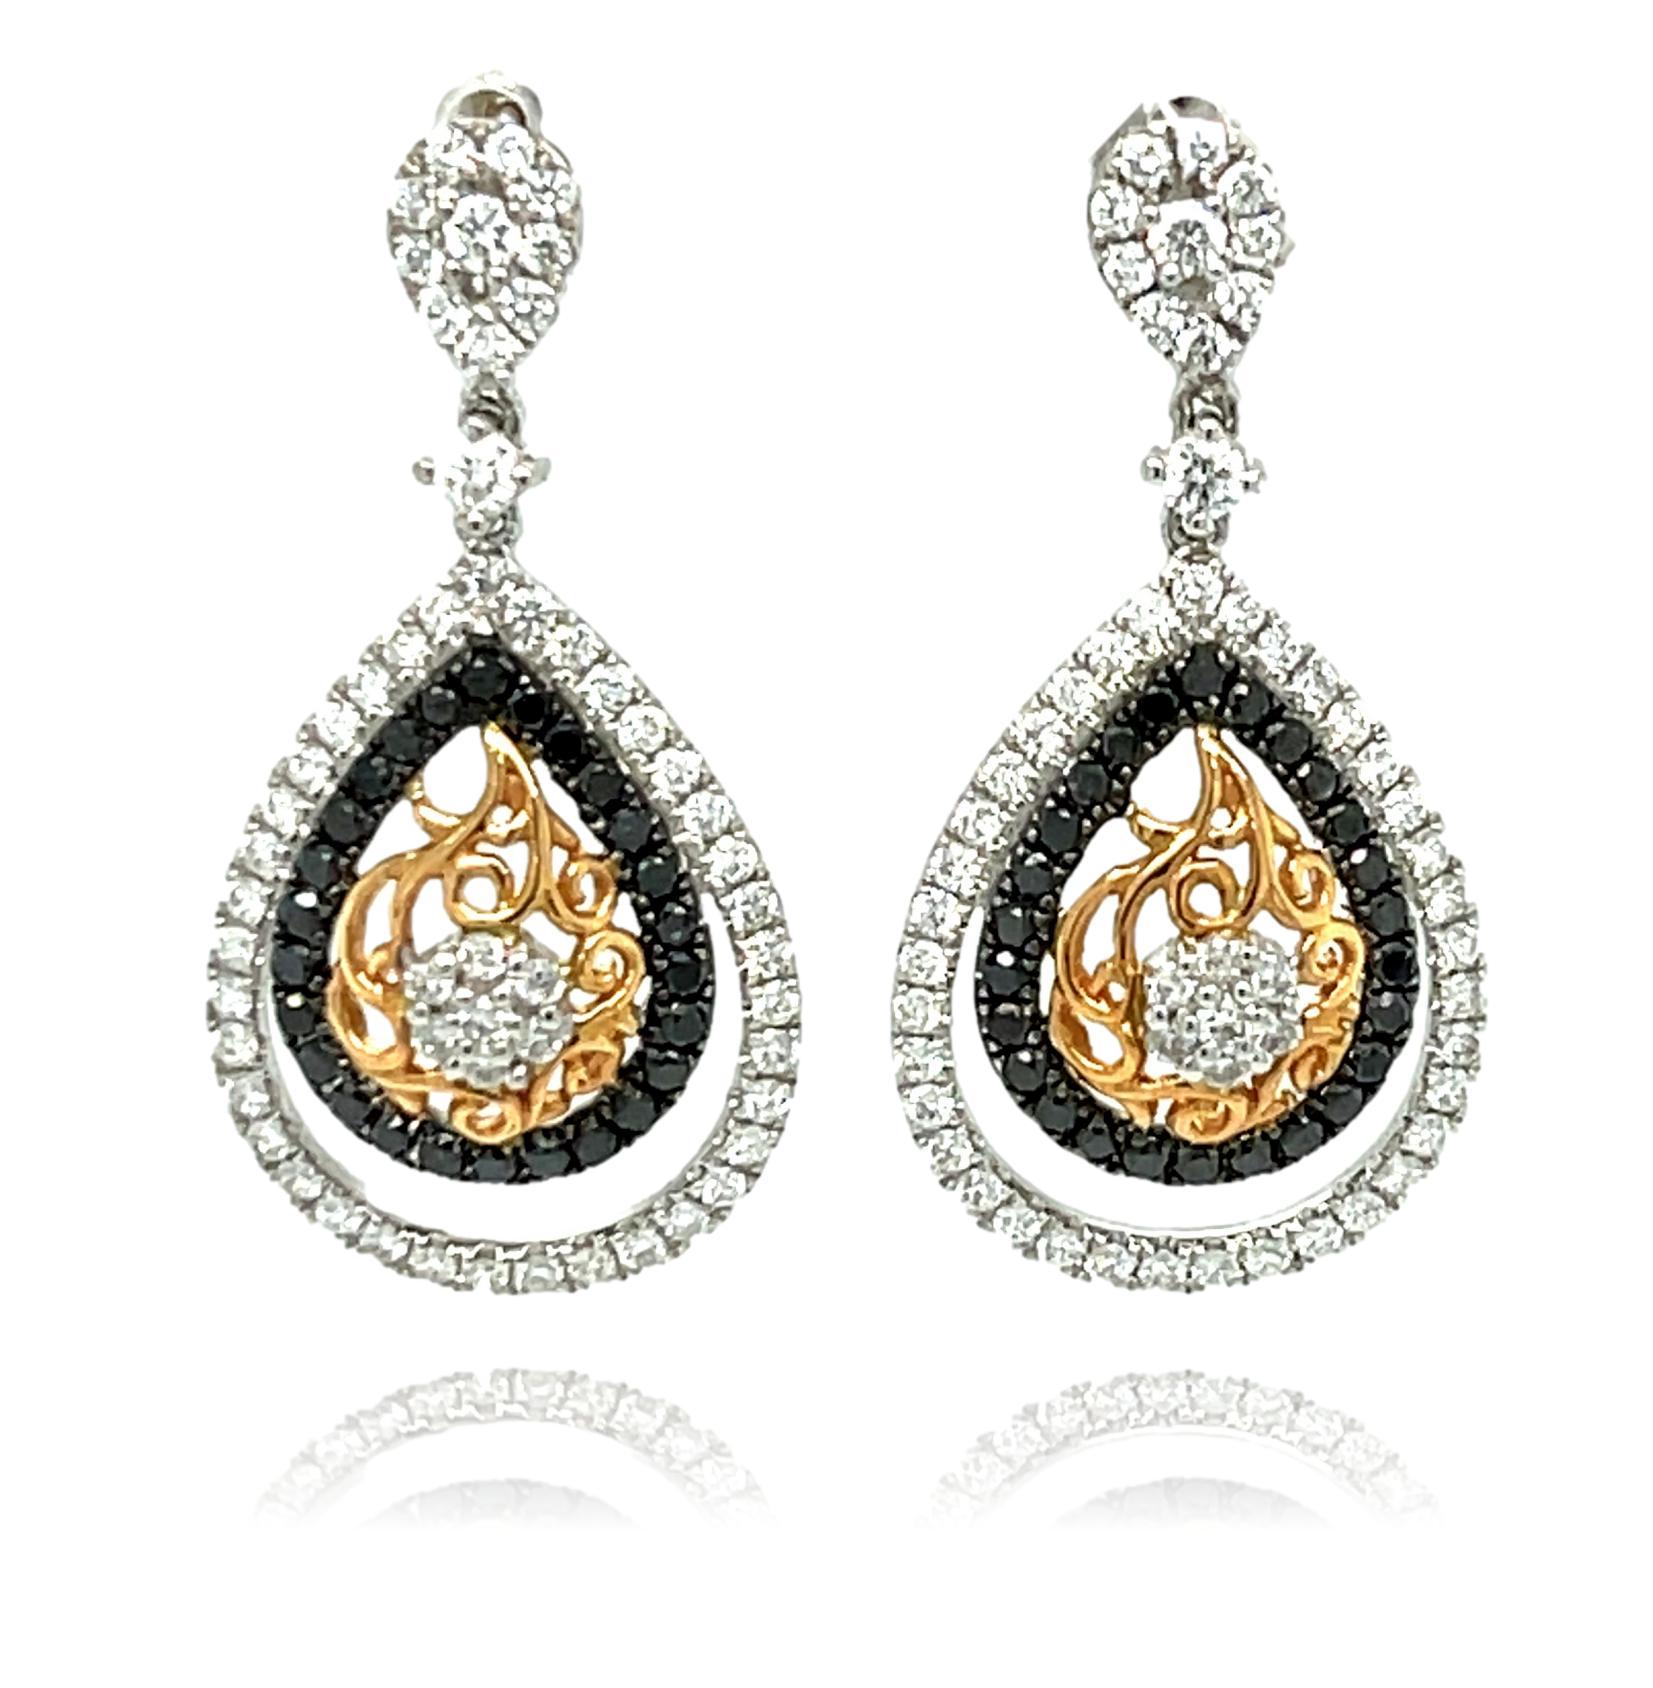 These stunning Drop and Dangle Diamond earrings have over 1 carat of sparkling diamonds all set in 18K white and rose gold. They have double lock closure for extra security. These earrings come in a beautiful box ready for the perfect gift! 

18Kt